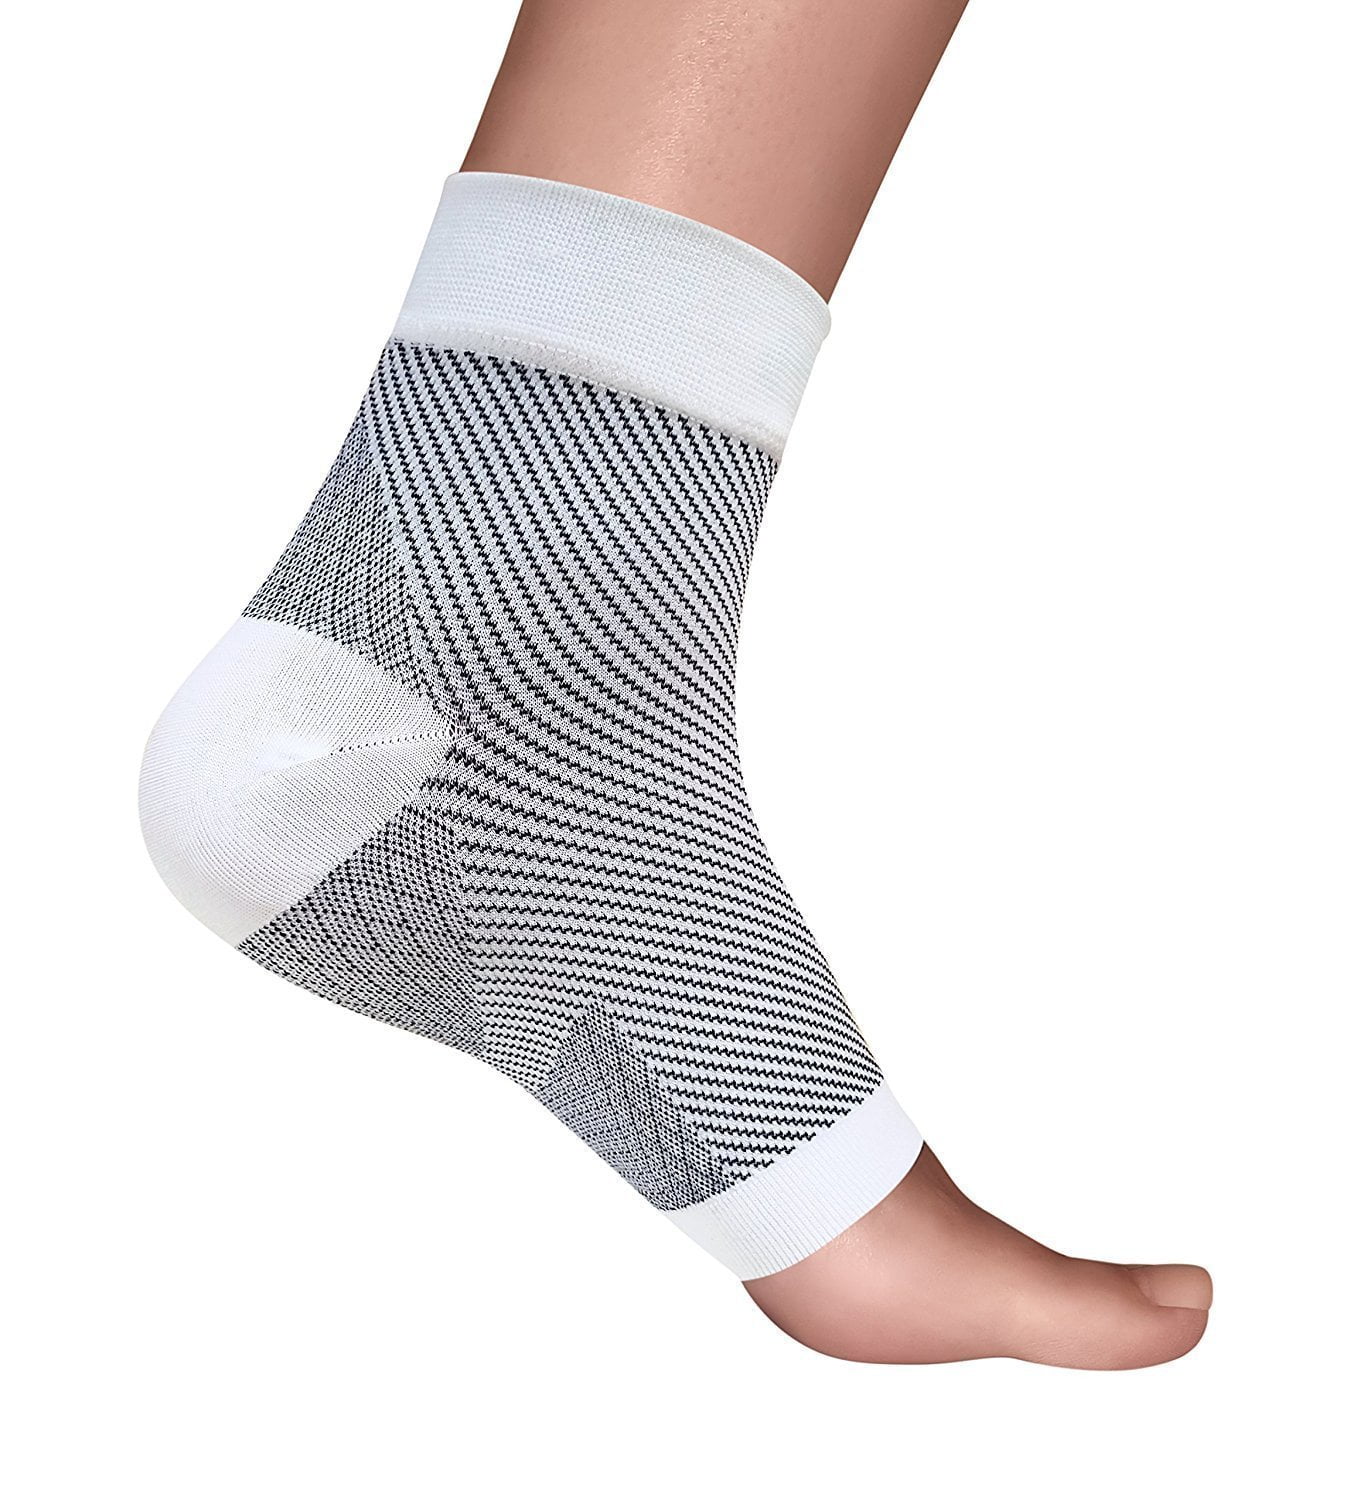 Plantar Fasciitis Compression Socks Foot Sleeves to Relieve Foot Pain